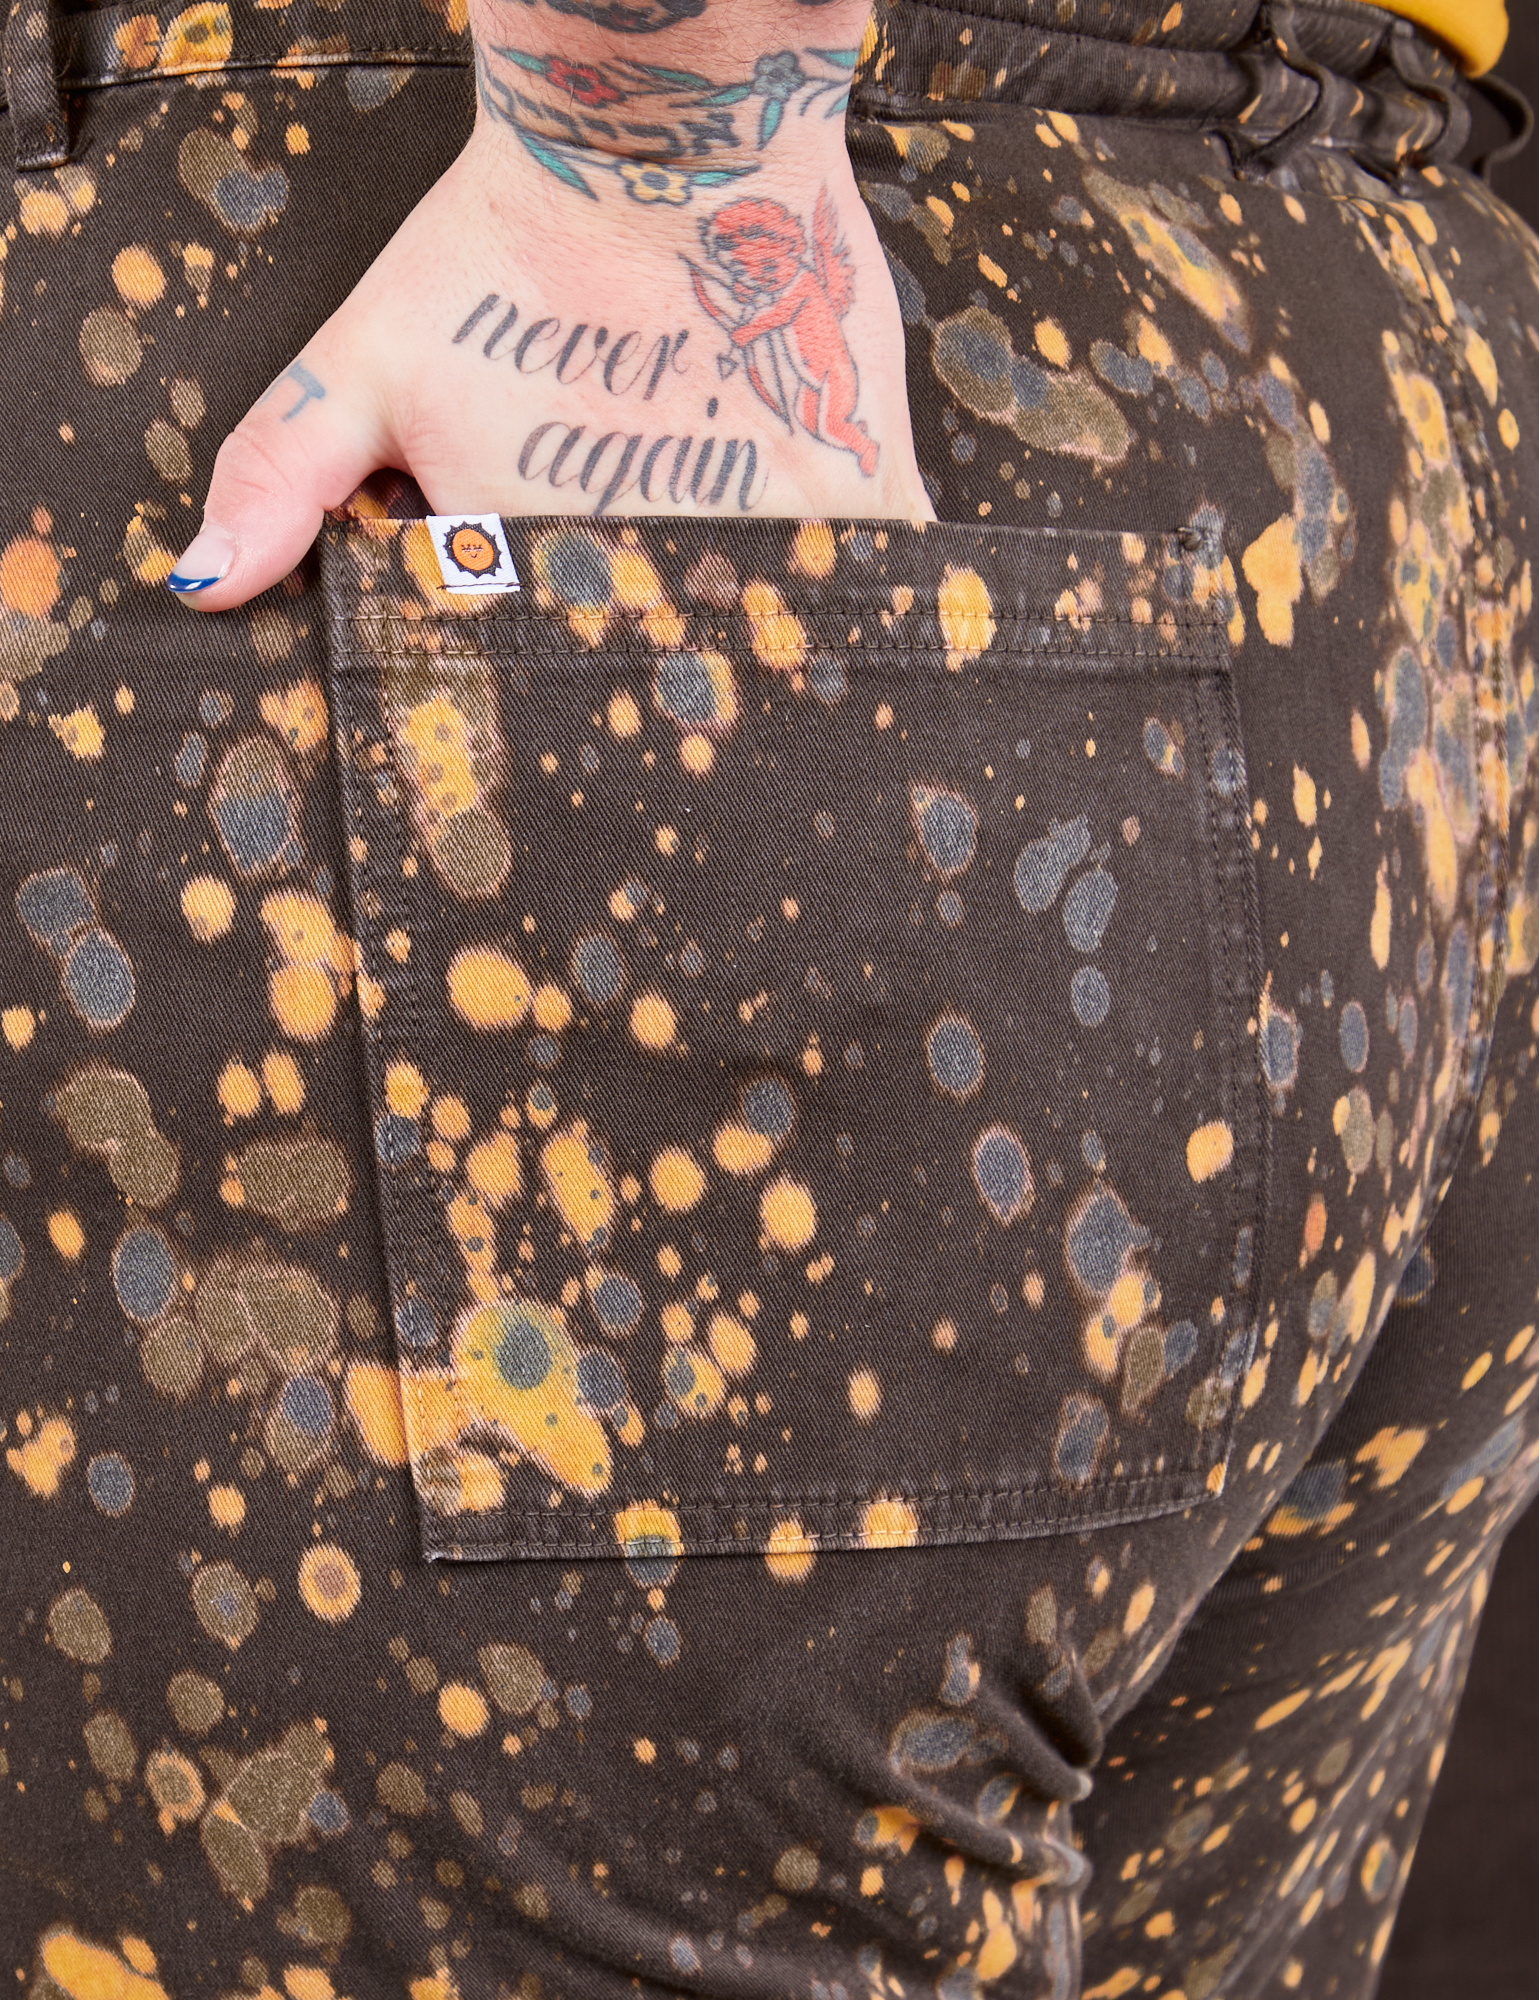 Marble Splatter Work Pants in Espresso Brown back pocket close up. Sam has their hand in the pocket.